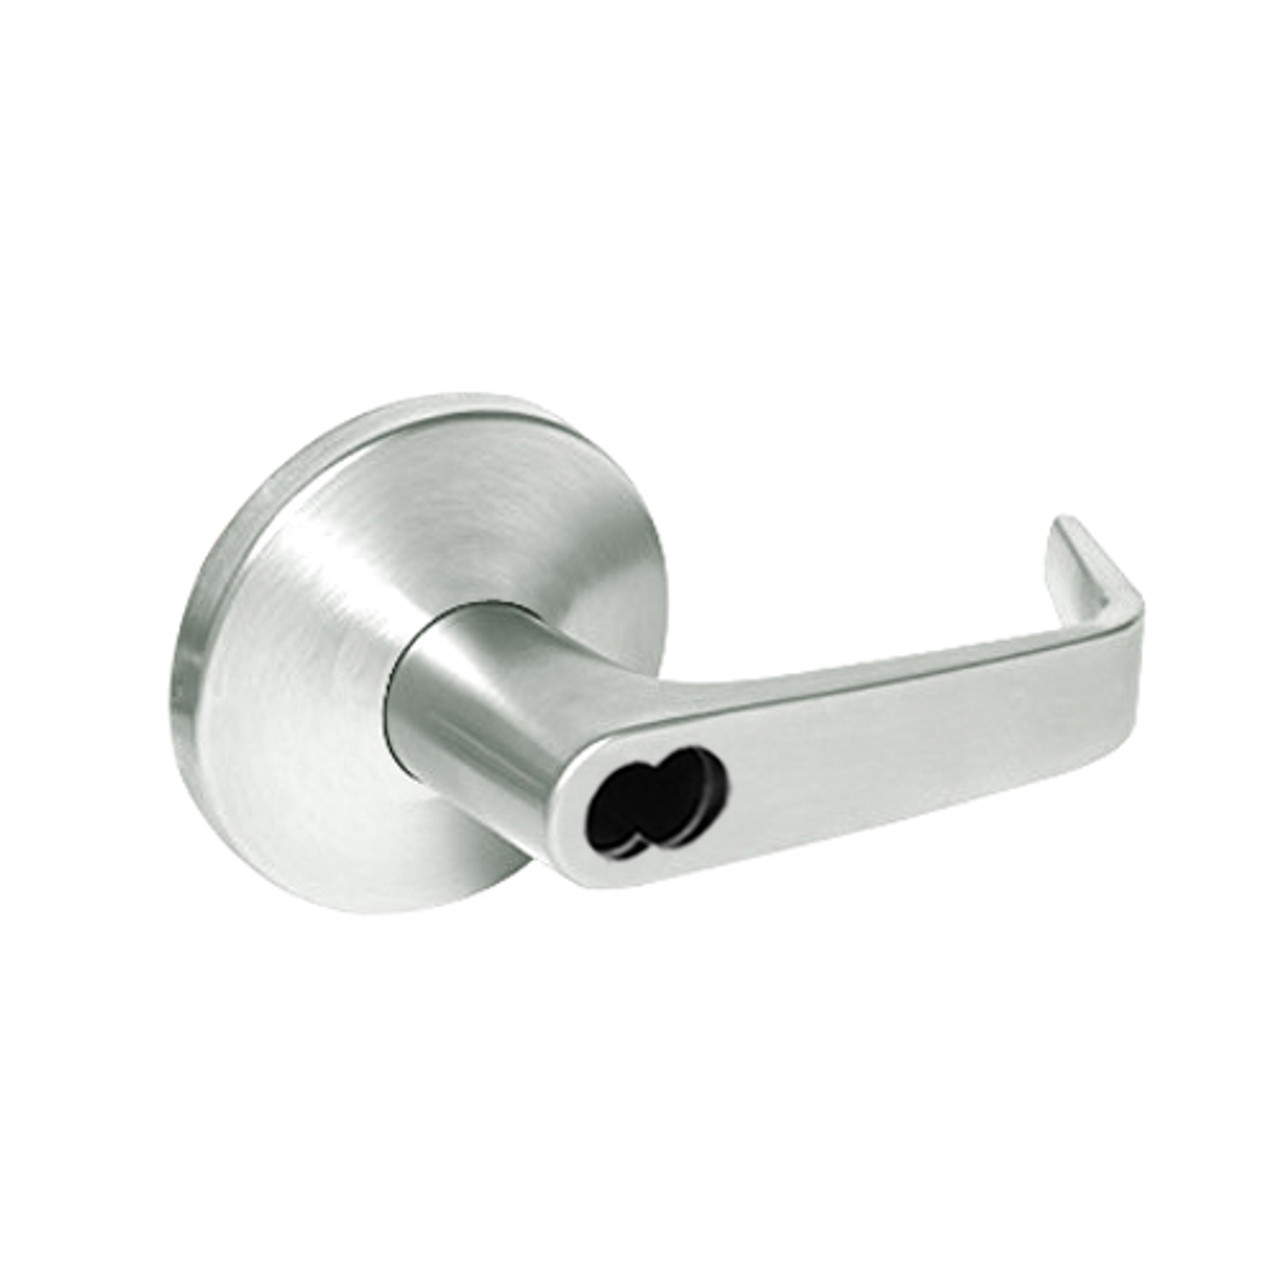 9K37E15LS3618 Best 9K Series Service Station Cylindrical Lever Locks with Contour Angle with Return Lever Design Accept 7 Pin Best Core in Bright Nickel